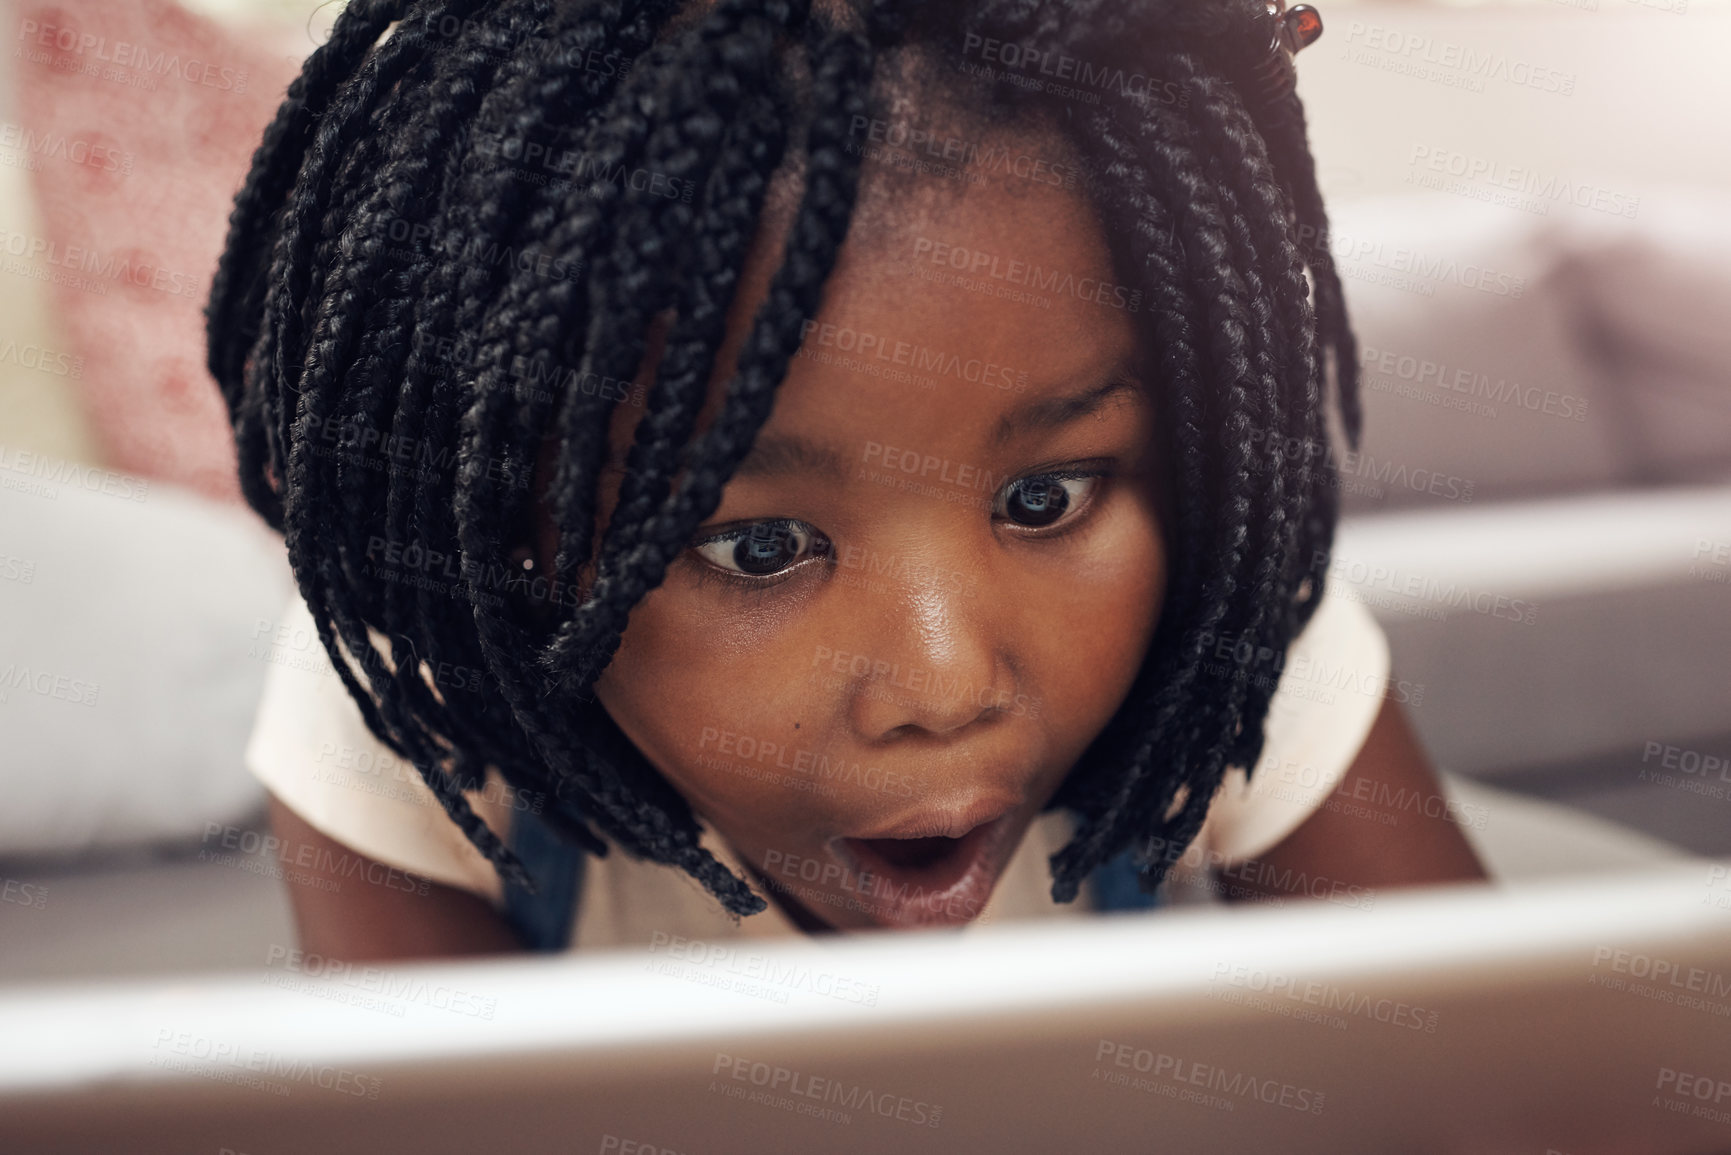 Buy stock photo Cropped shot of an adorable little girl having fun while using a digital tablet at home